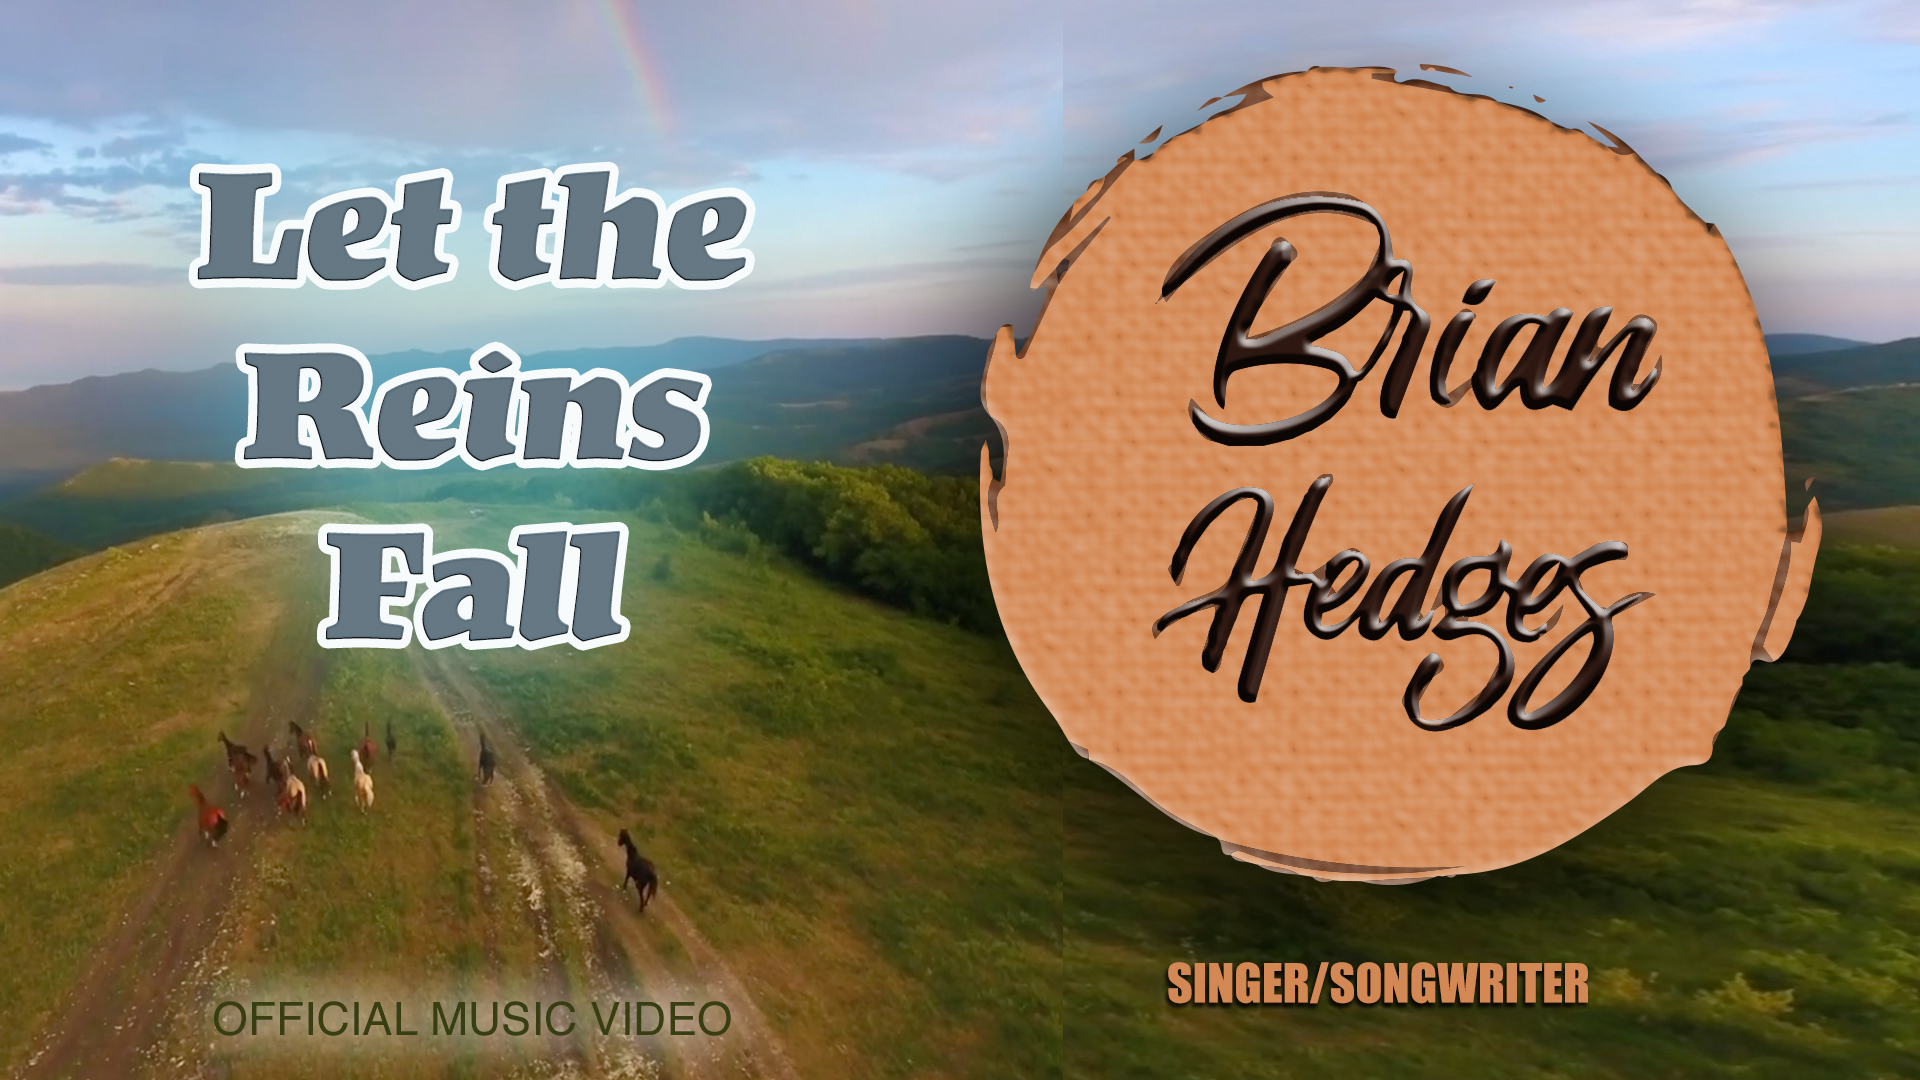 FoxPromotions and The Groove House Recording Studio Introduce the Just Released Brian Hedges' Song and New Video, "Let The Reins Fall"